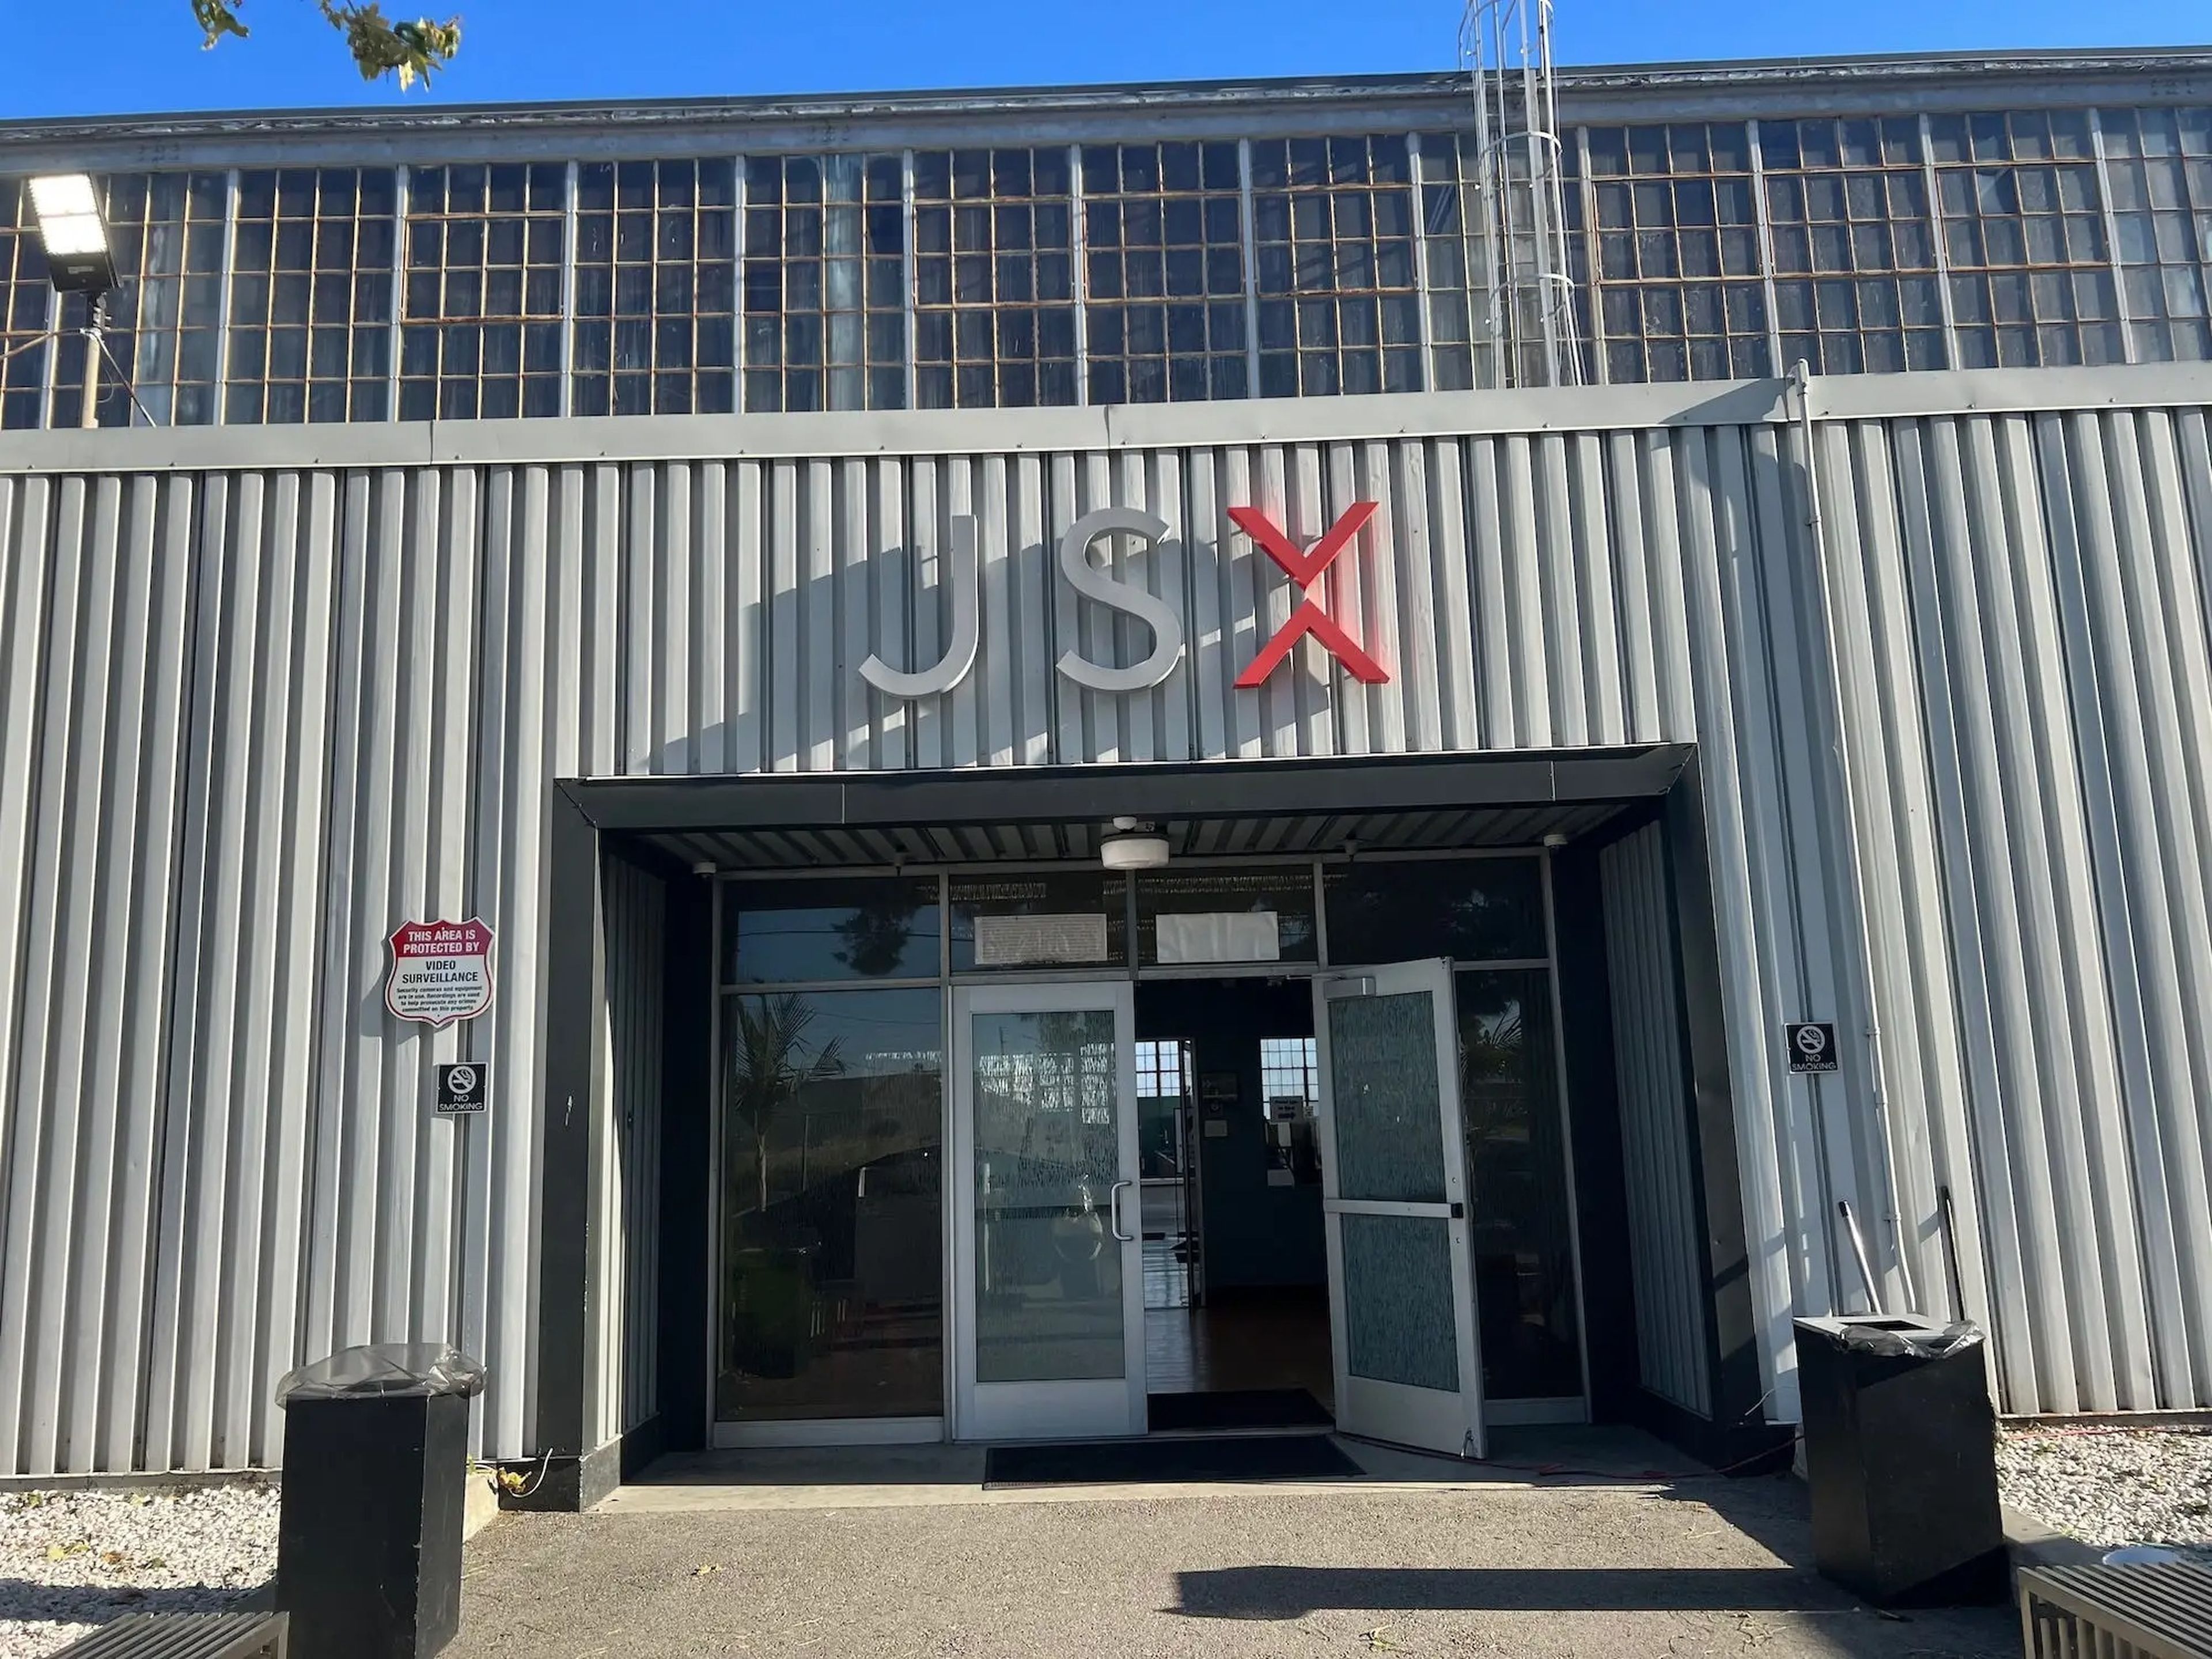 A view outside JSX's private terminal with a JSX logo above an open doorway.